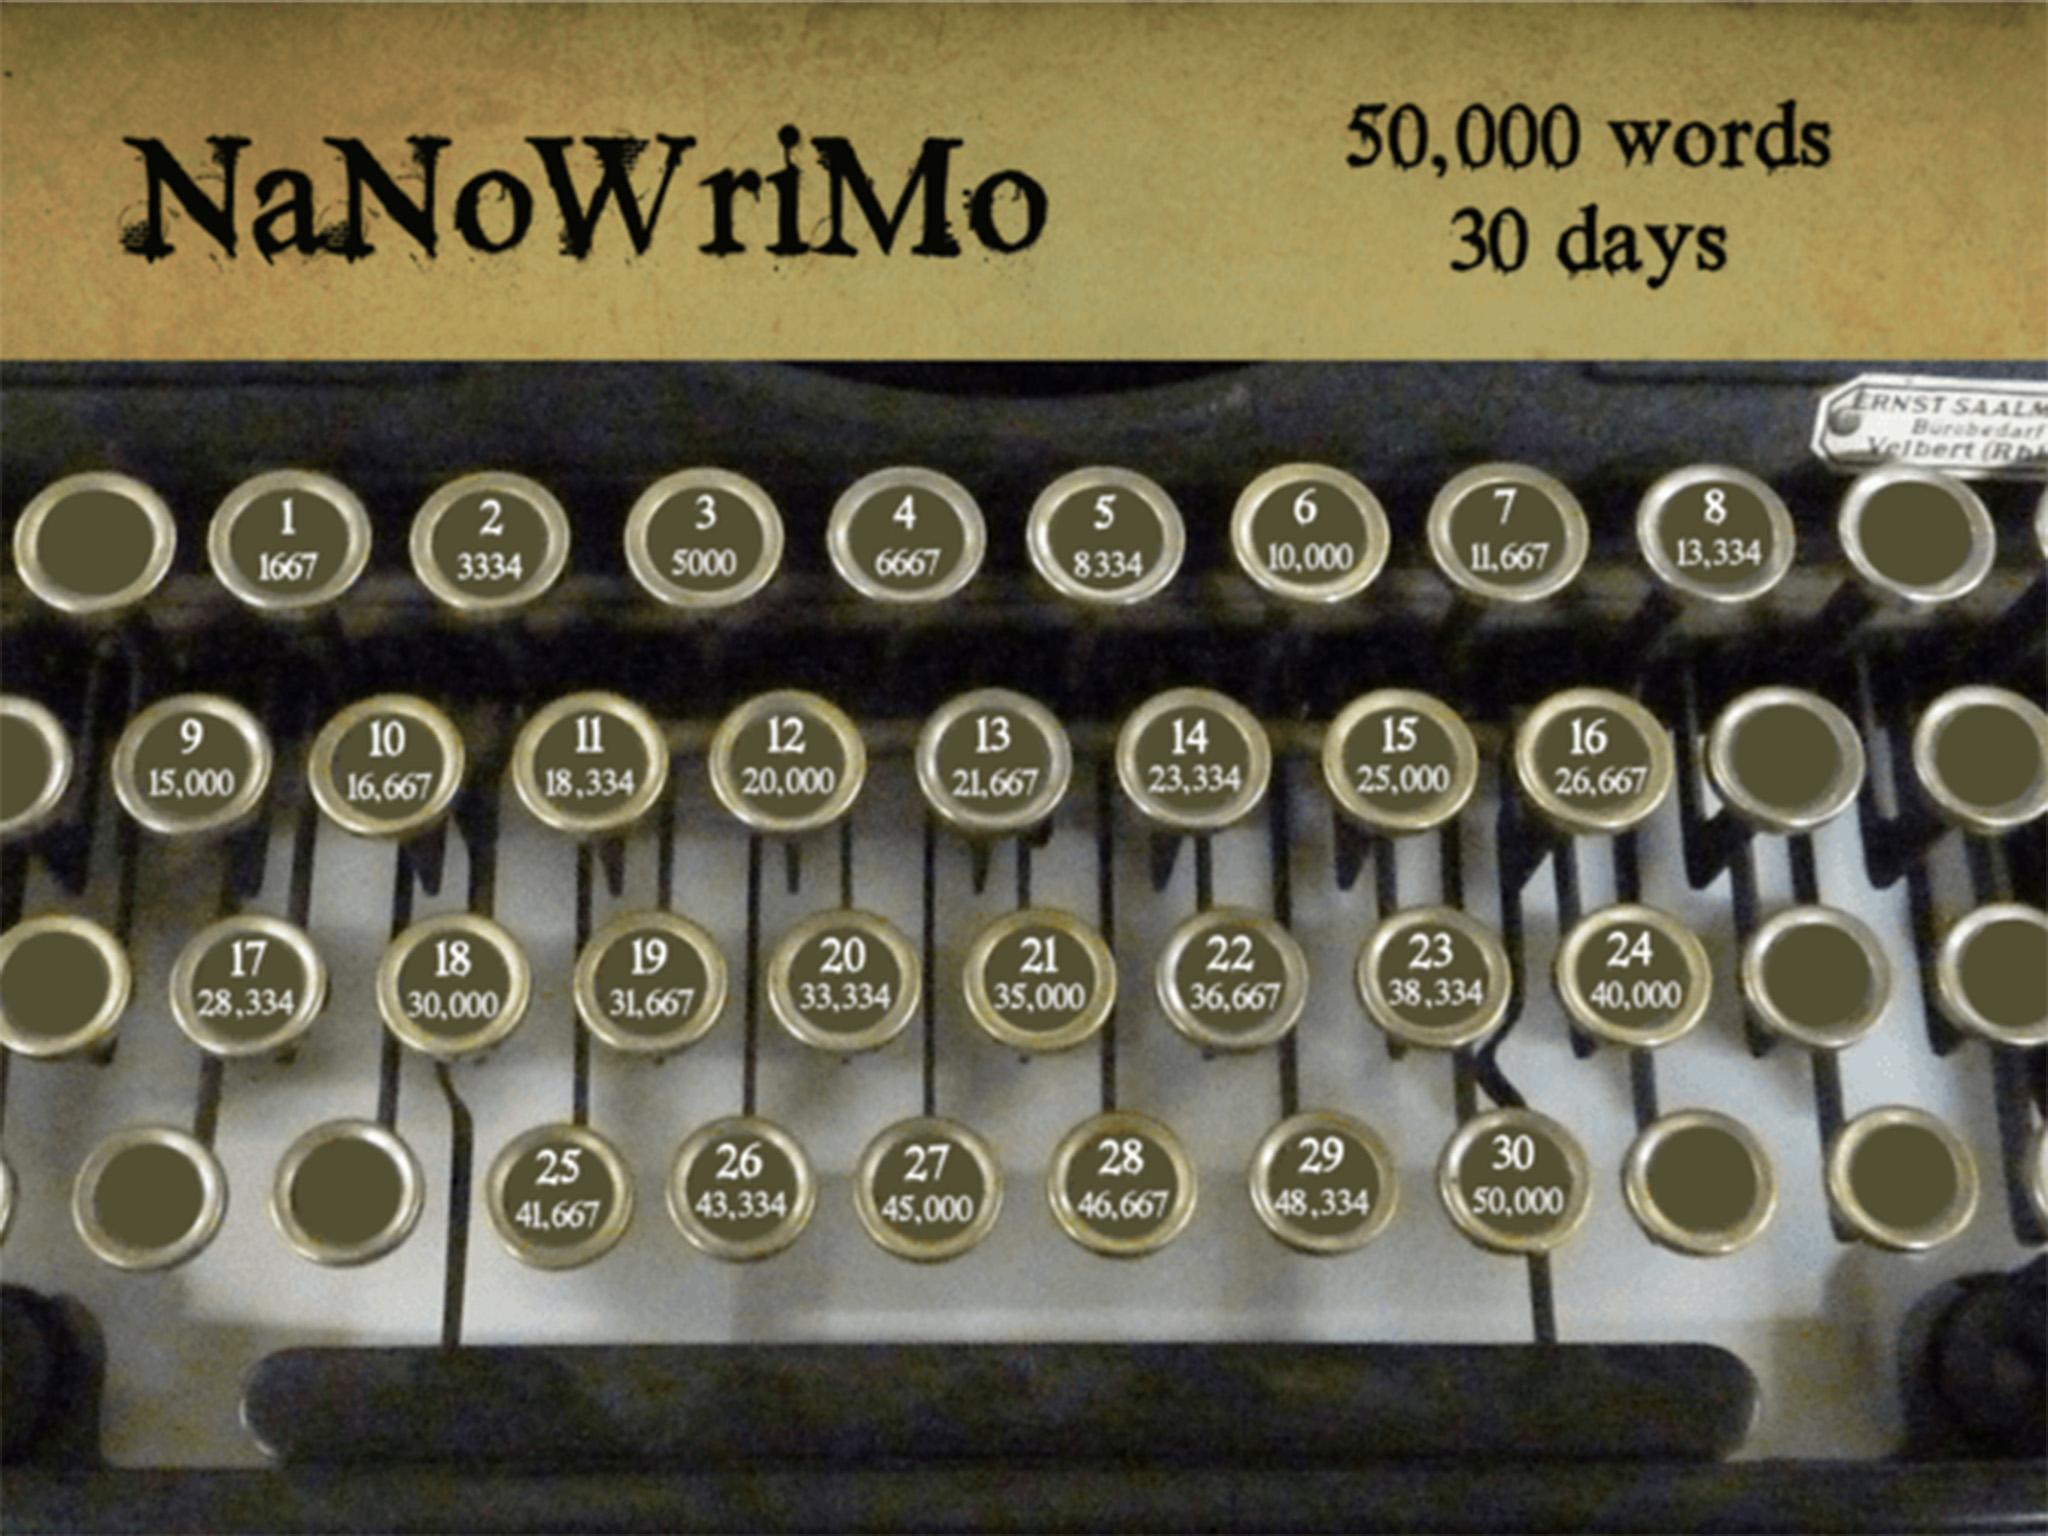 The scheme focuses strictly on wordcount, to get newbies in the habit of writing daily